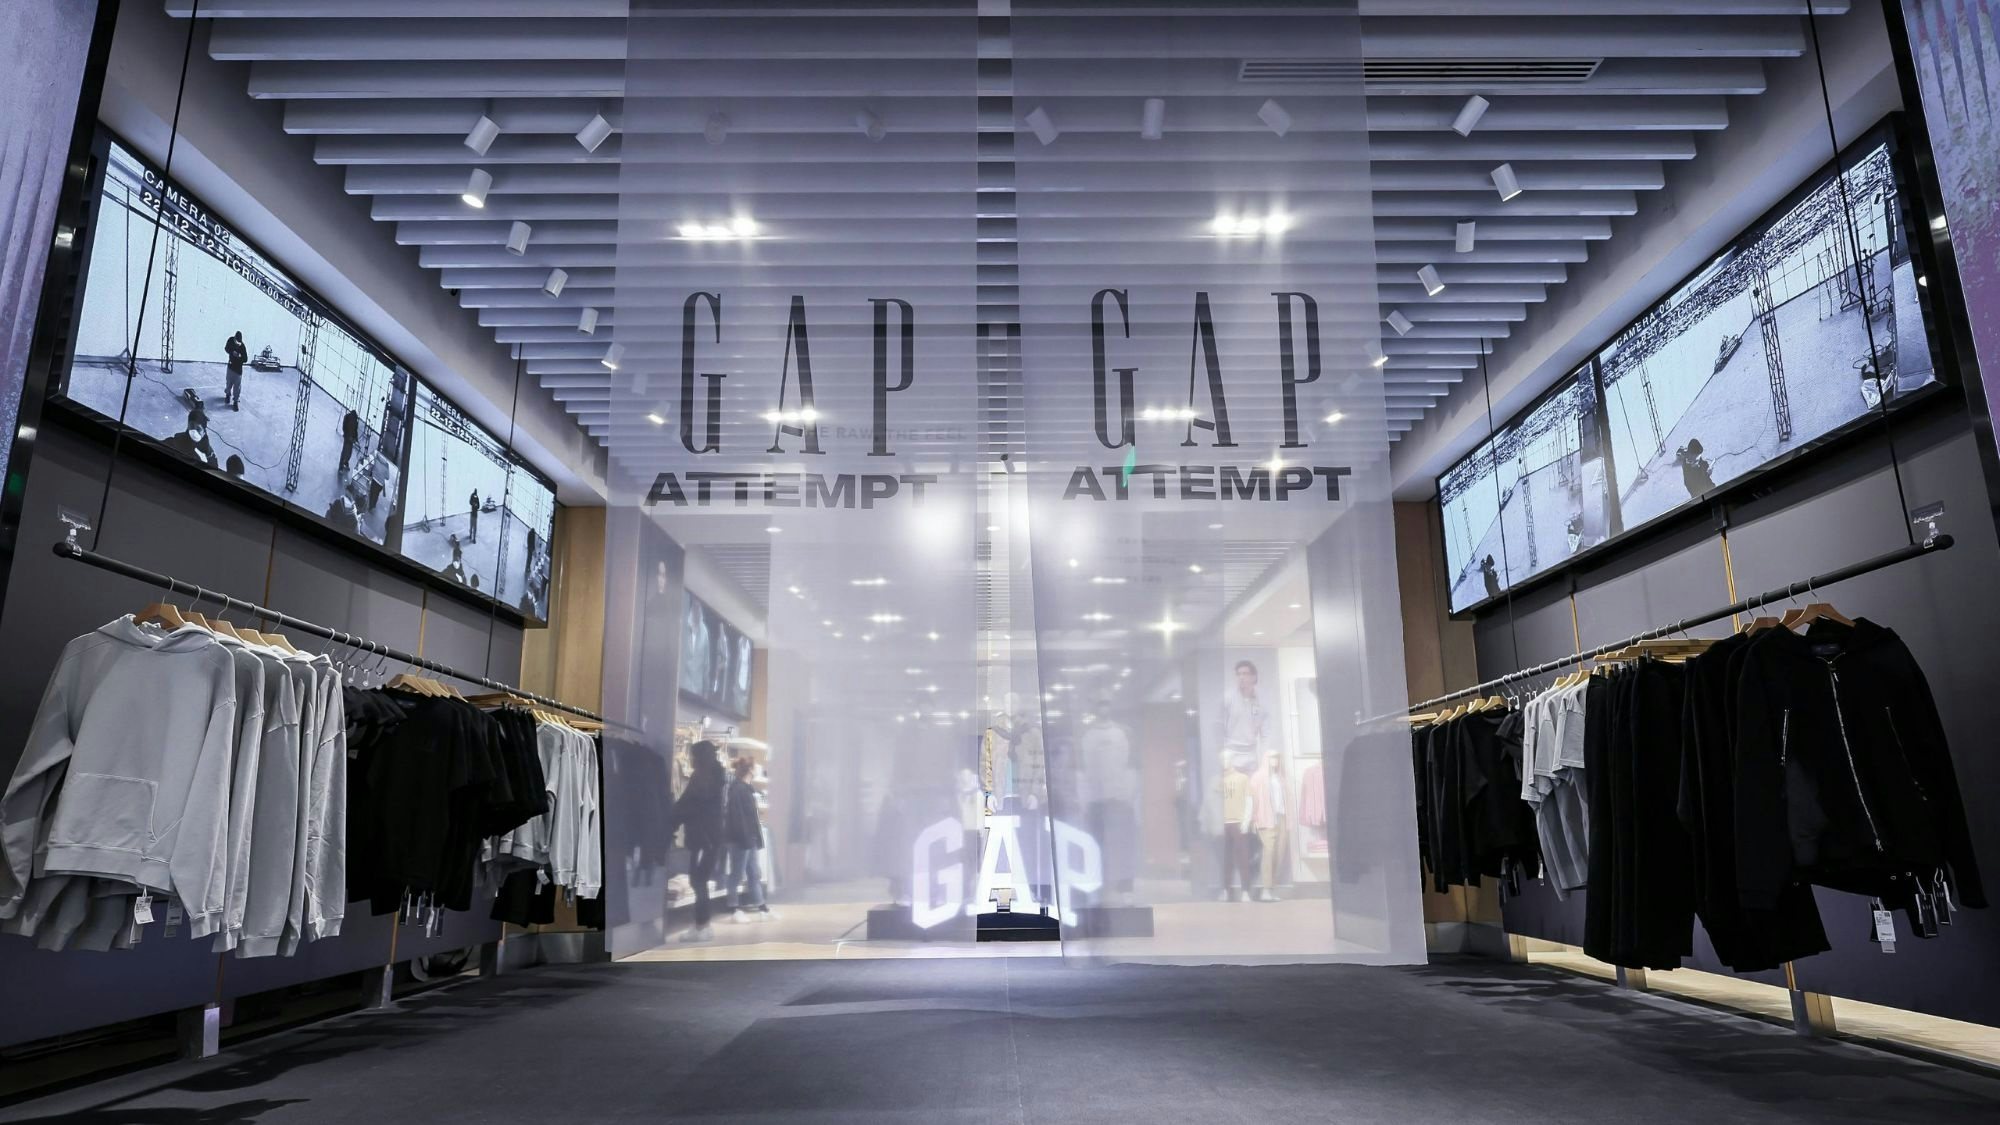 Known for its sleek ready-to-wear products, Wuhan-based Attempt has teamed up with the likes of Ugg, Puma, Vans, and now Gap. Founder Liang Dong talks shop. Photo: Attempt x Gap